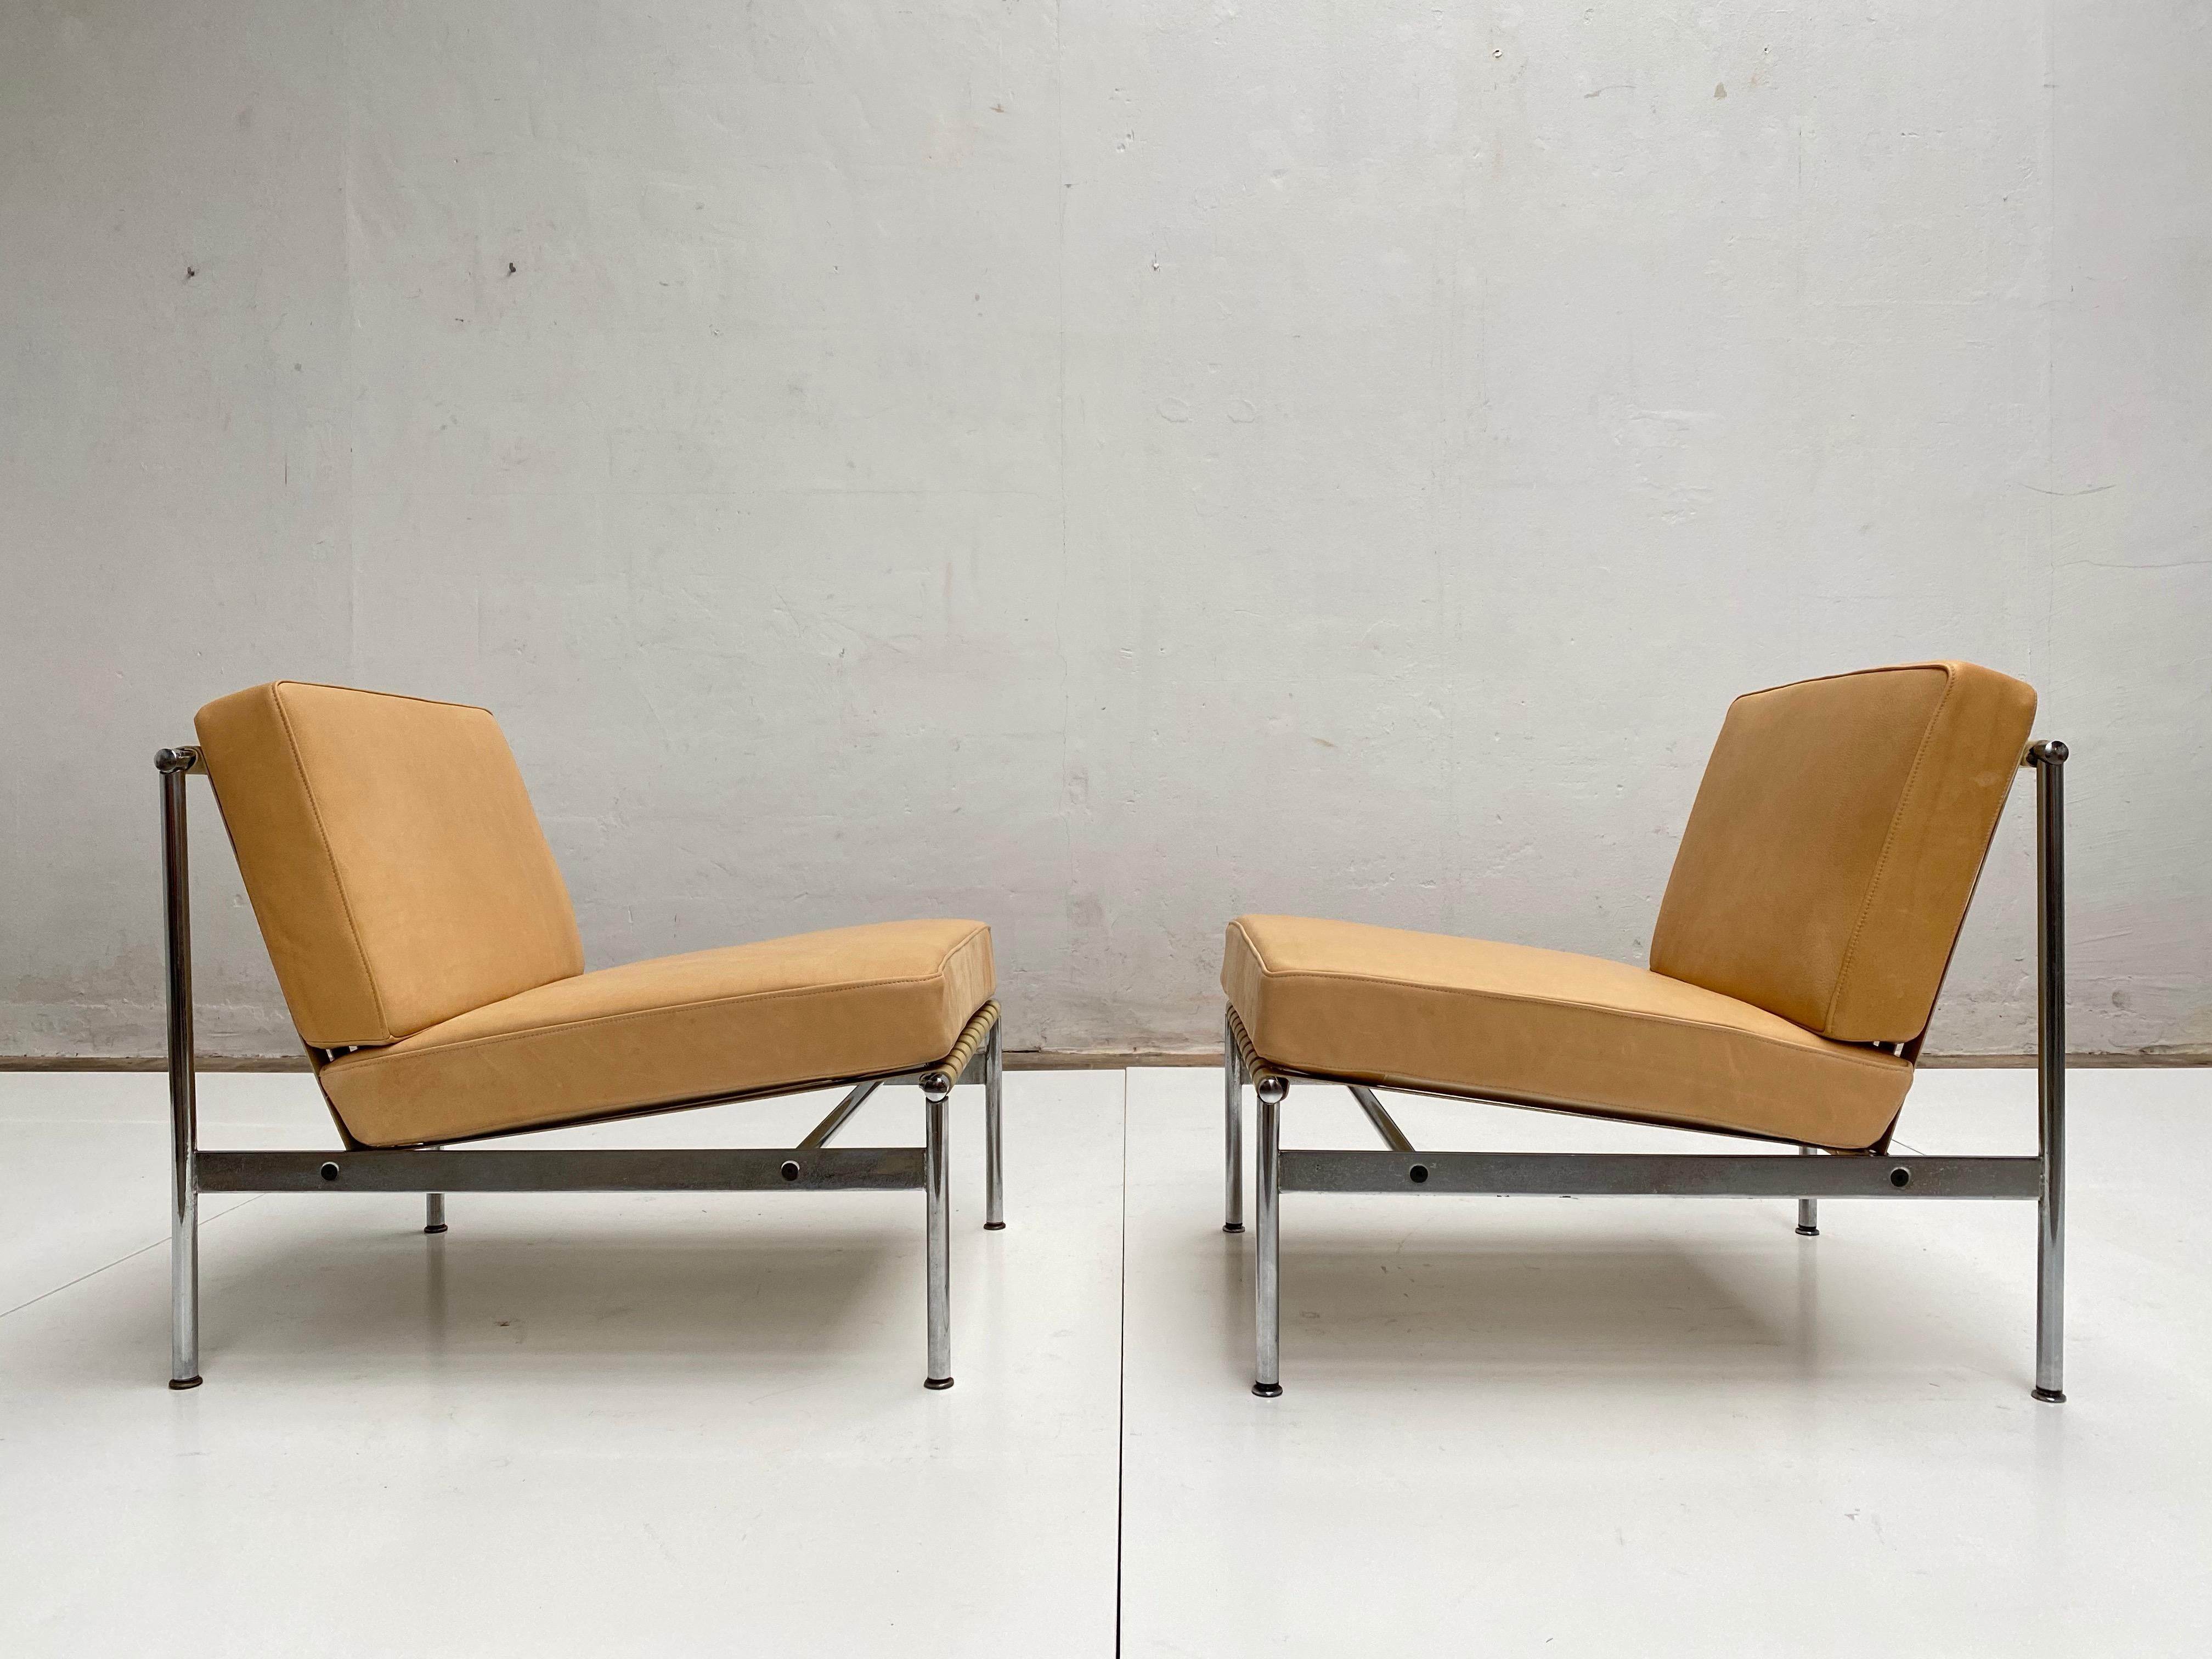 Nice pair of leather and chrome lounge chairs in the style of Florence Knoll, circa 1958-1962.

We bought these elegant chairs in France and they have a nice construction quality to them. 

The leather seat and back cushions are supported on